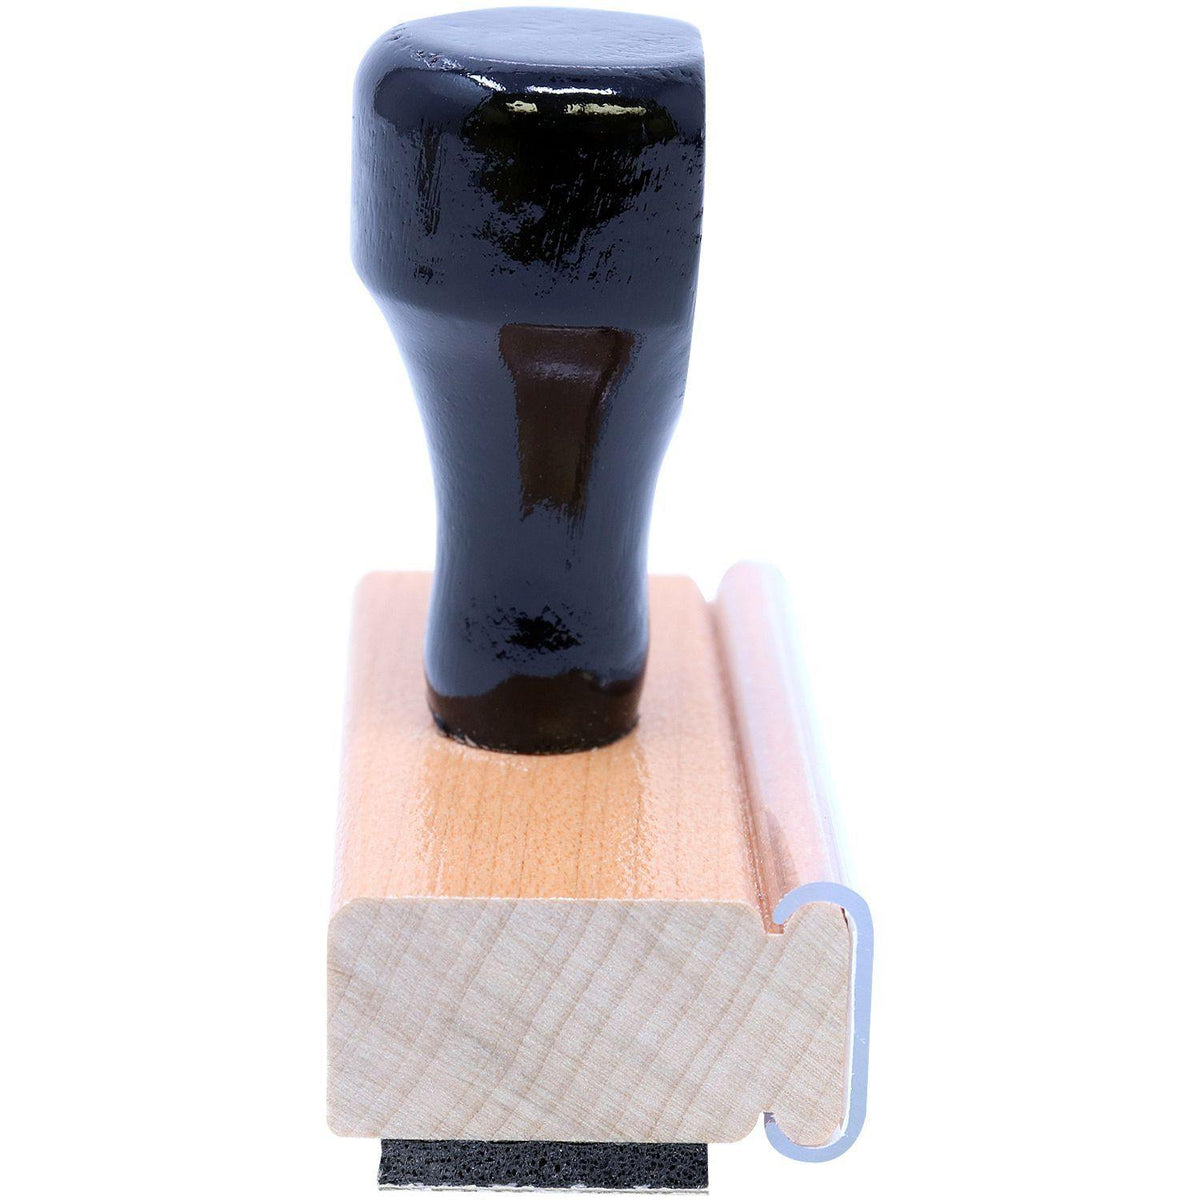 Large Trust Rubber Stamp - Engineer Seal Stamps - Brand_Acorn, Impression Size_Large, Stamp Type_Regular Stamp, Type of Use_Finance